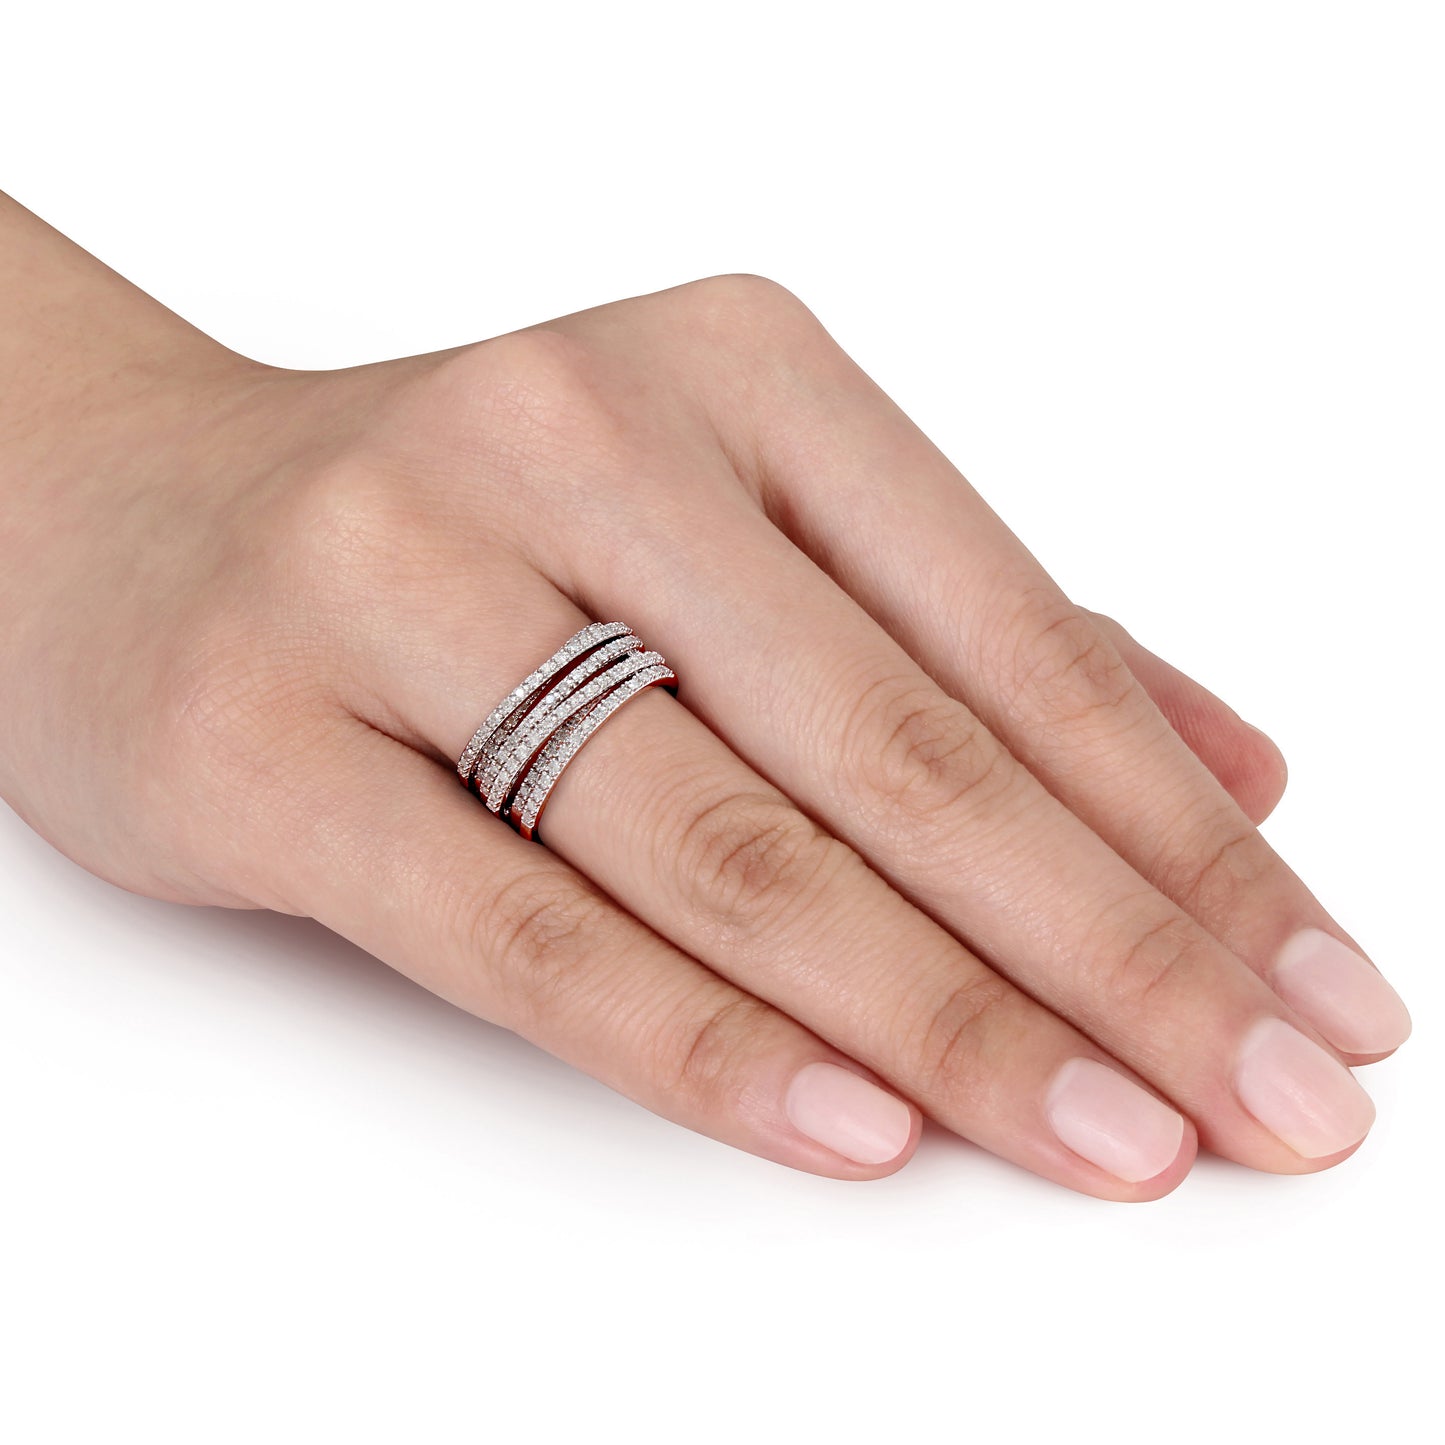 Julie Leah Diamond Crossover Ring in Sterling Silver